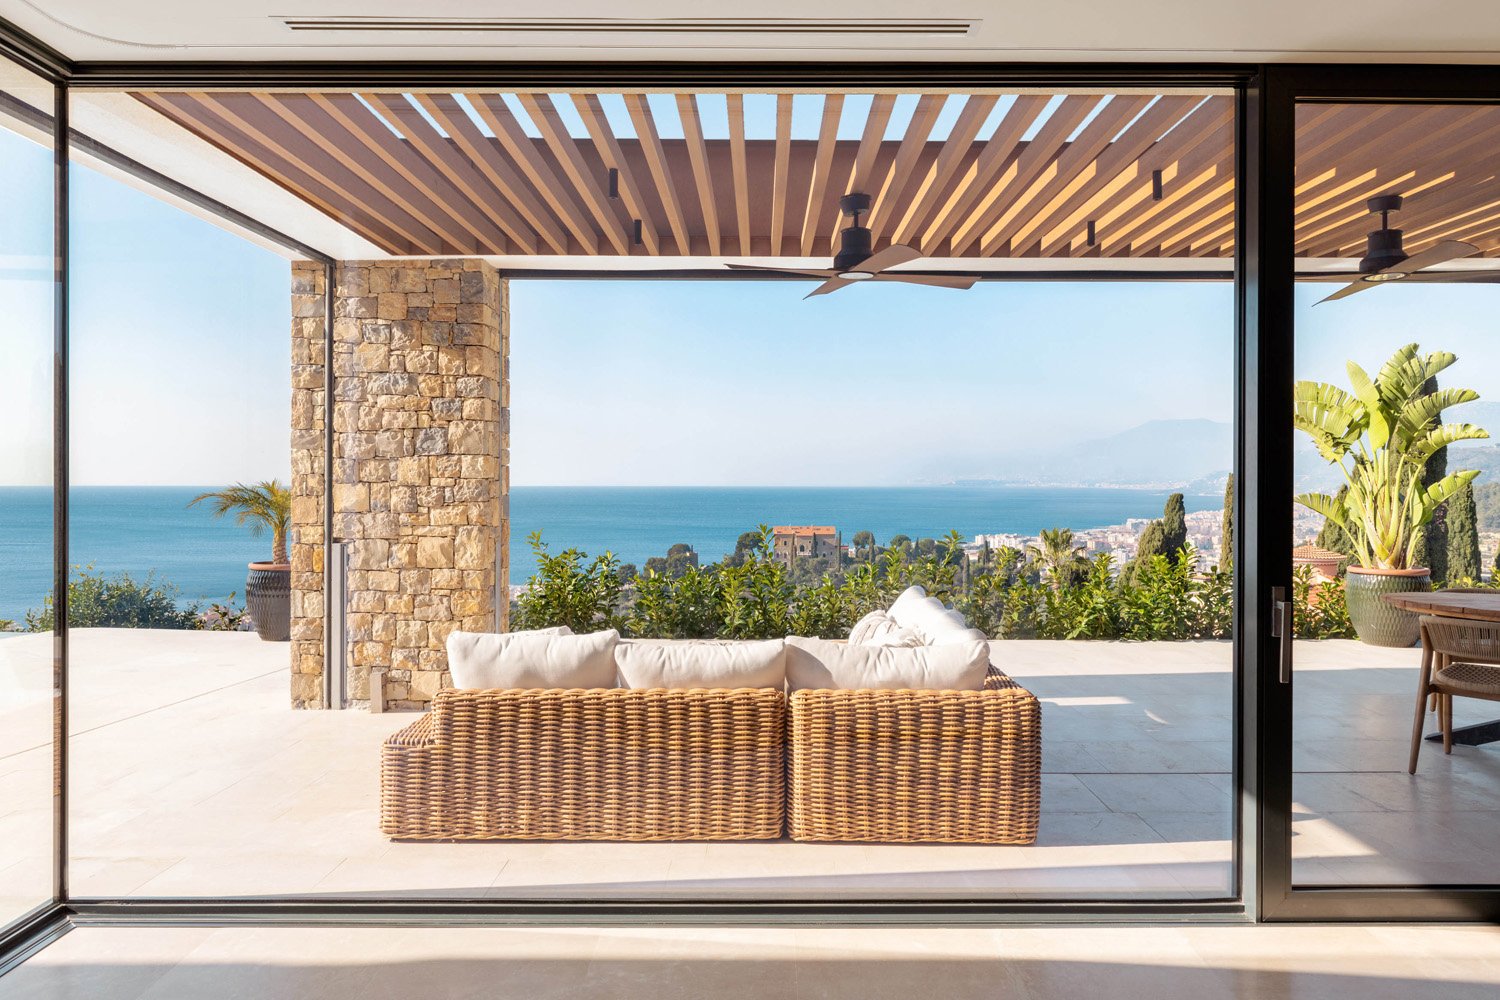 The conjunction with the nature offering impressive views over sea and mountains and the exposition towards the sun with internal courtyards were key elements for the design and the arrangement of the spaces | Anna Positano